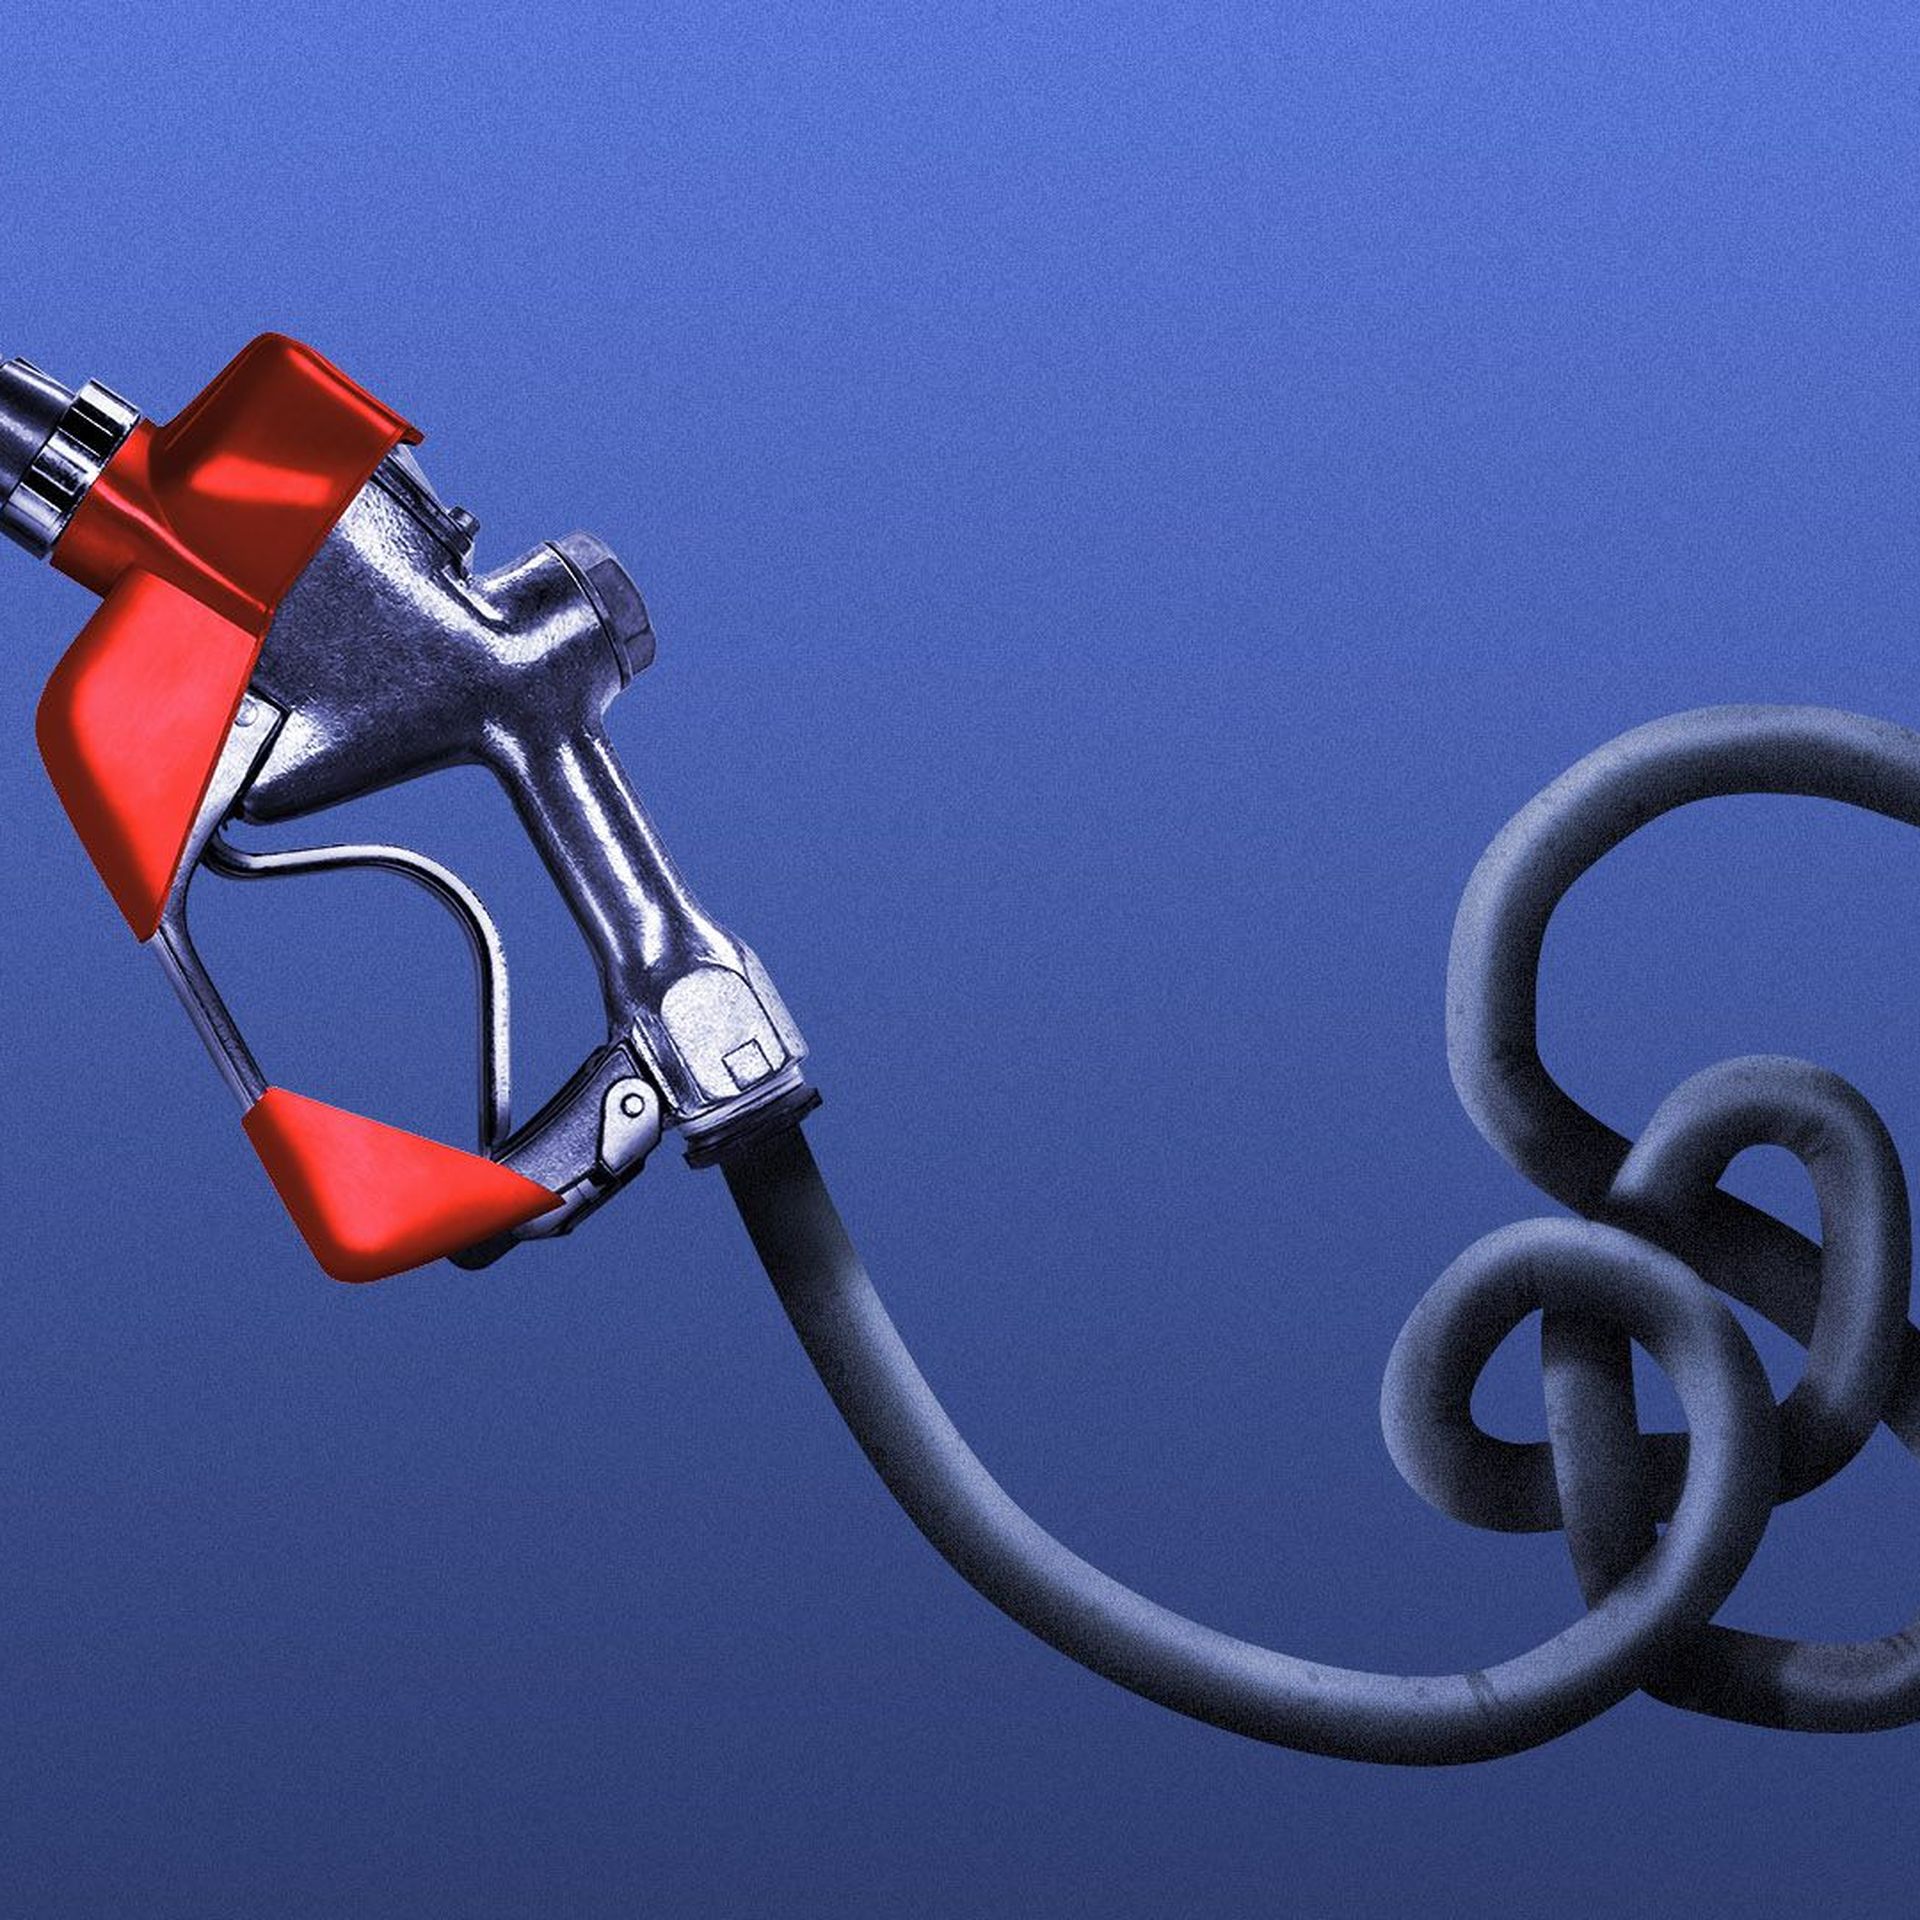 Illustration of a gas pump with a knot in the hose